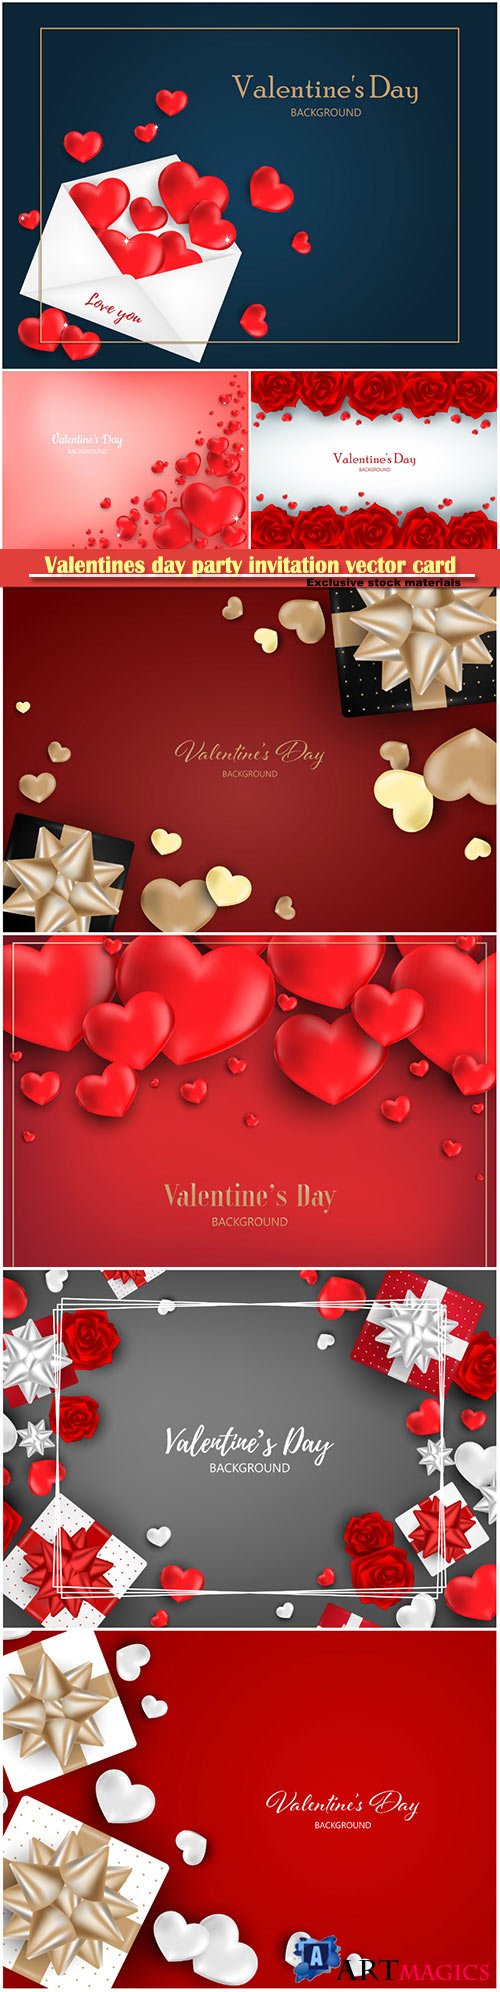 Valentines day party invitation vector card # 39